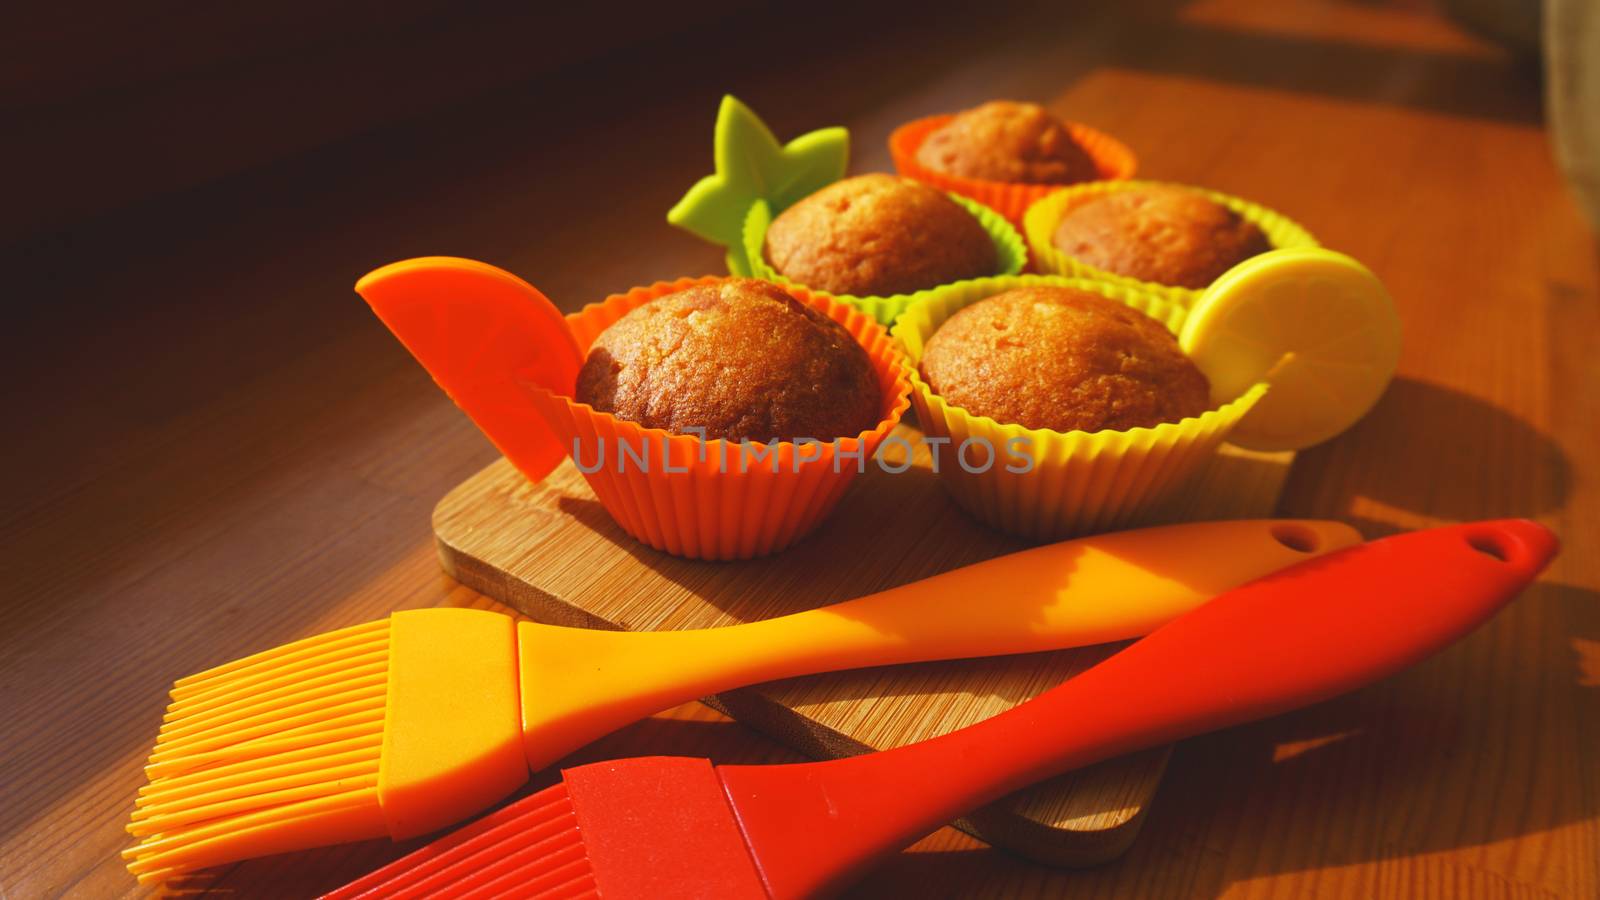 Simple mini muffins in colorful silicone bakeware. Silicone cup baking cupcakes and silicone brushes. Kitchen and cooking concept on wooden background